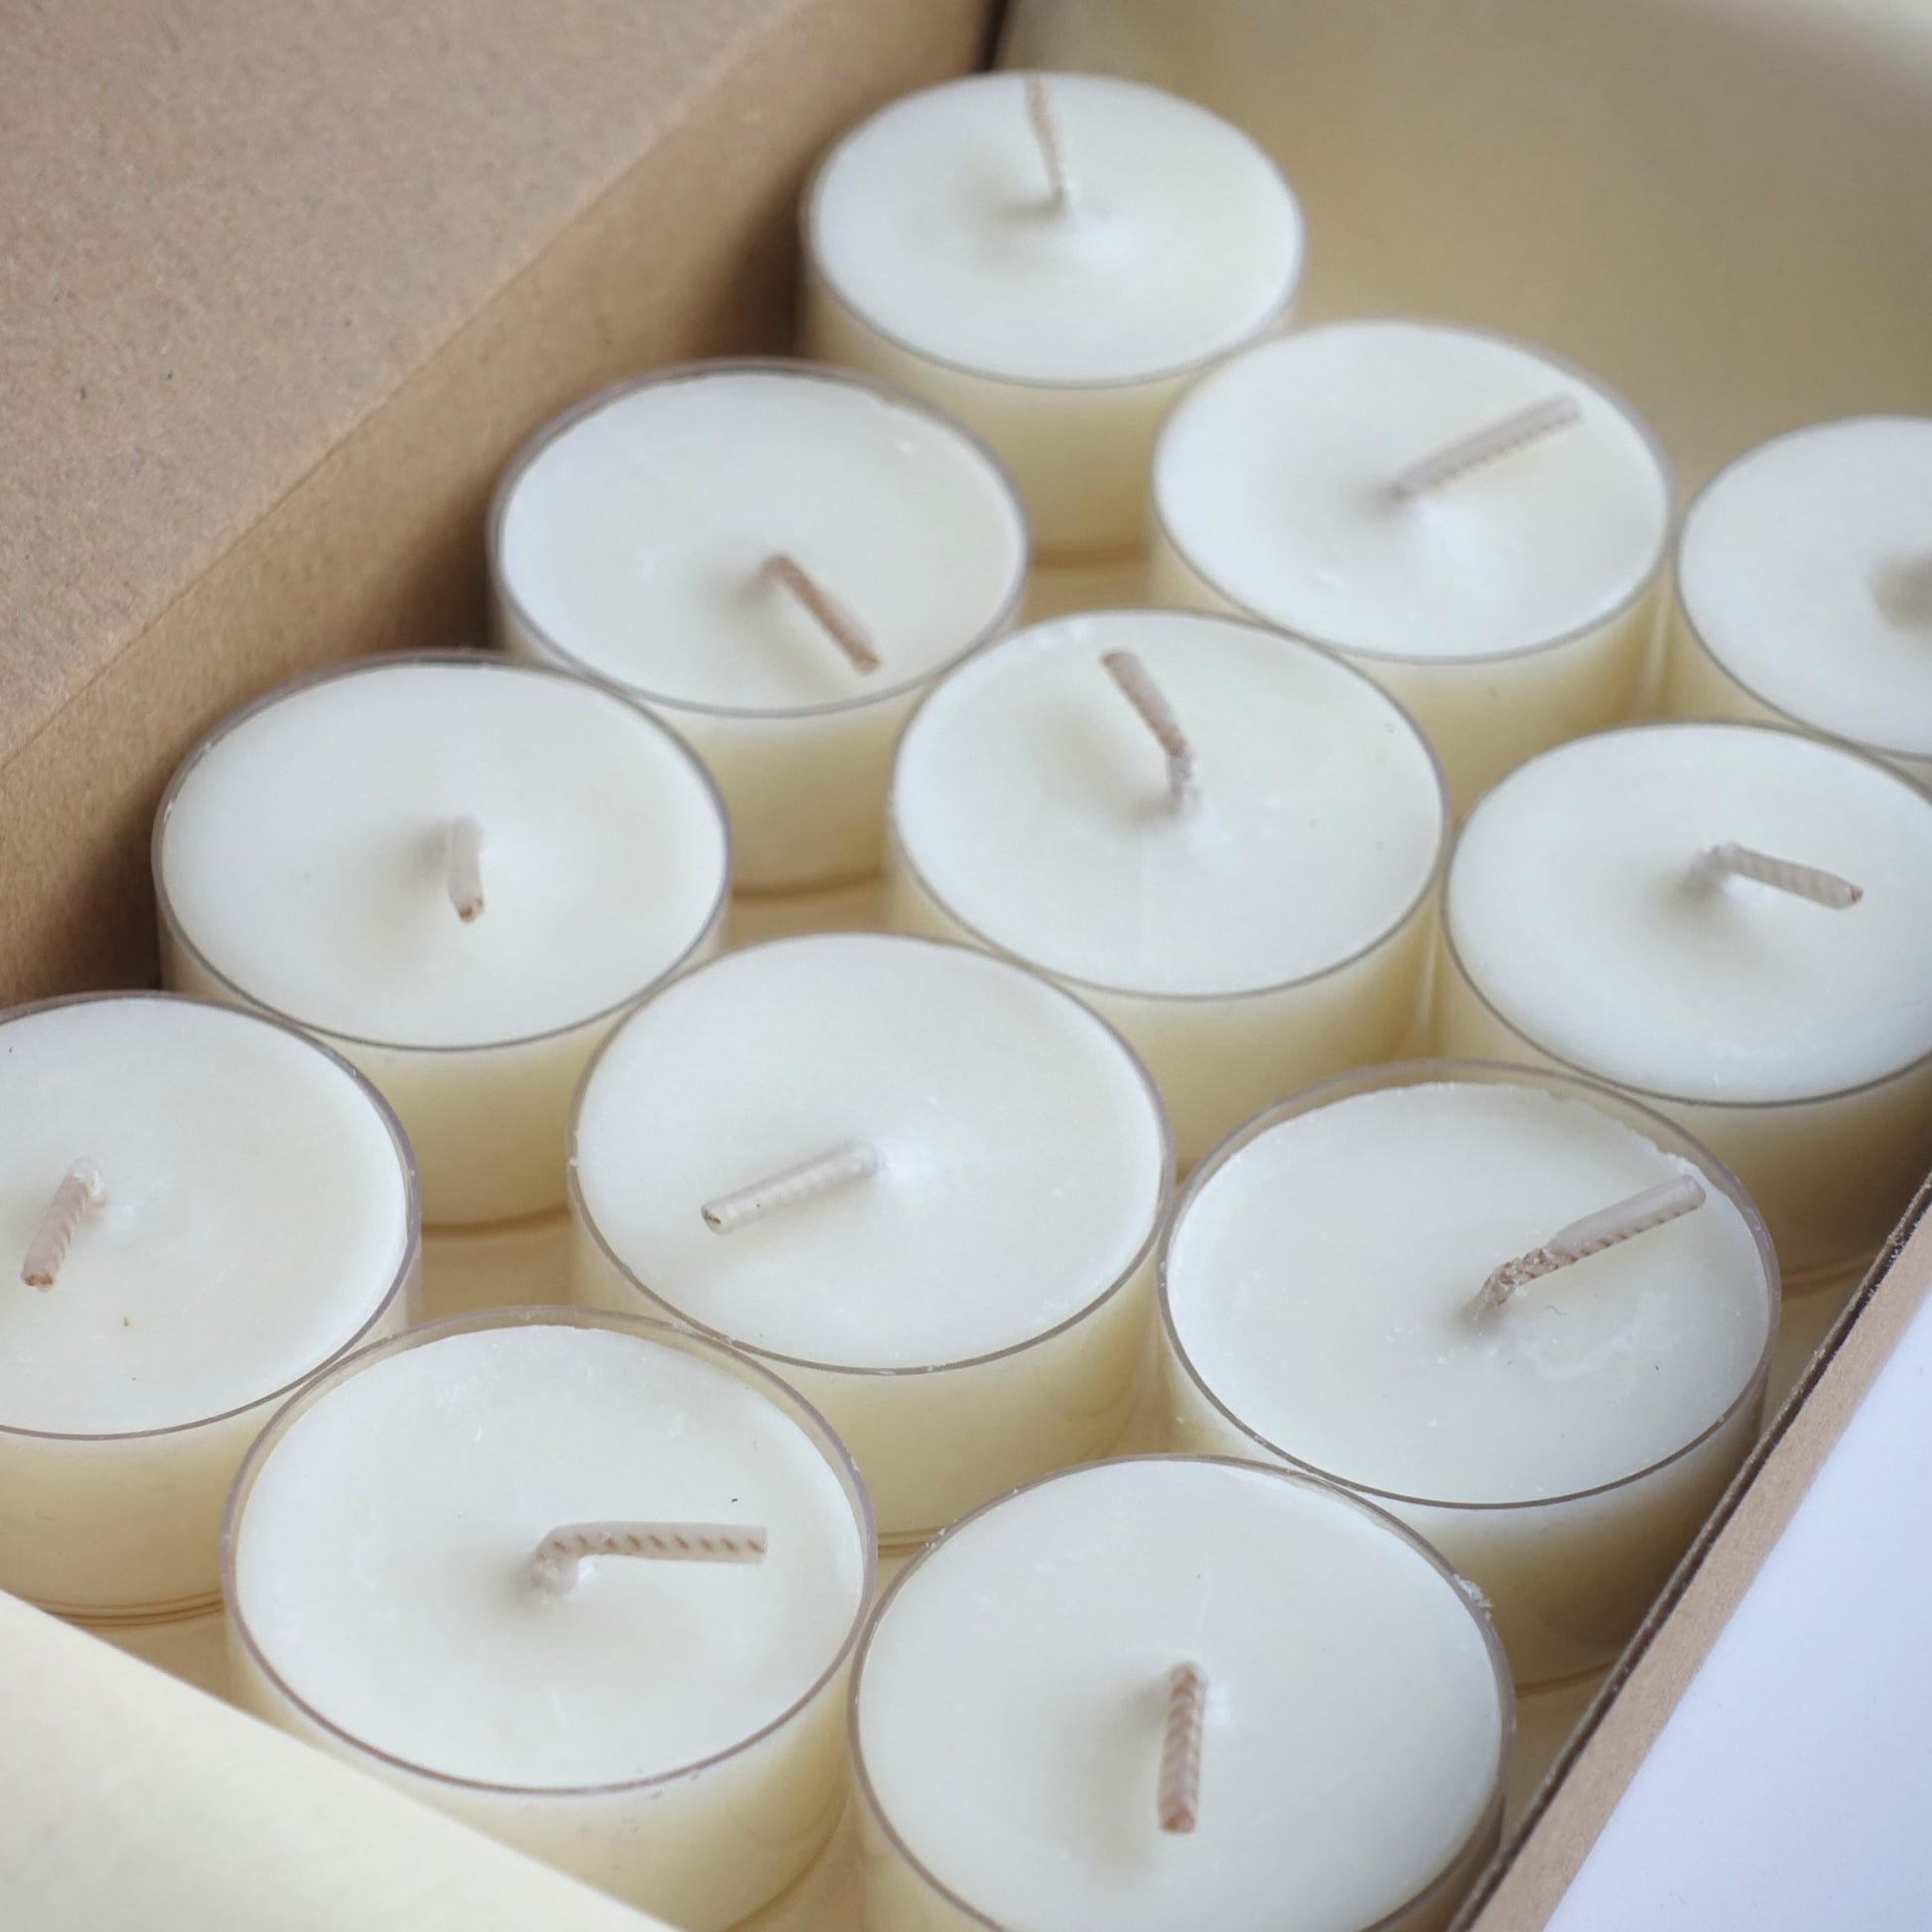 12 Shō-moon Natural Calm scented Tealights Candle with  pure essential oils and clean burning natural wax in their packaging box